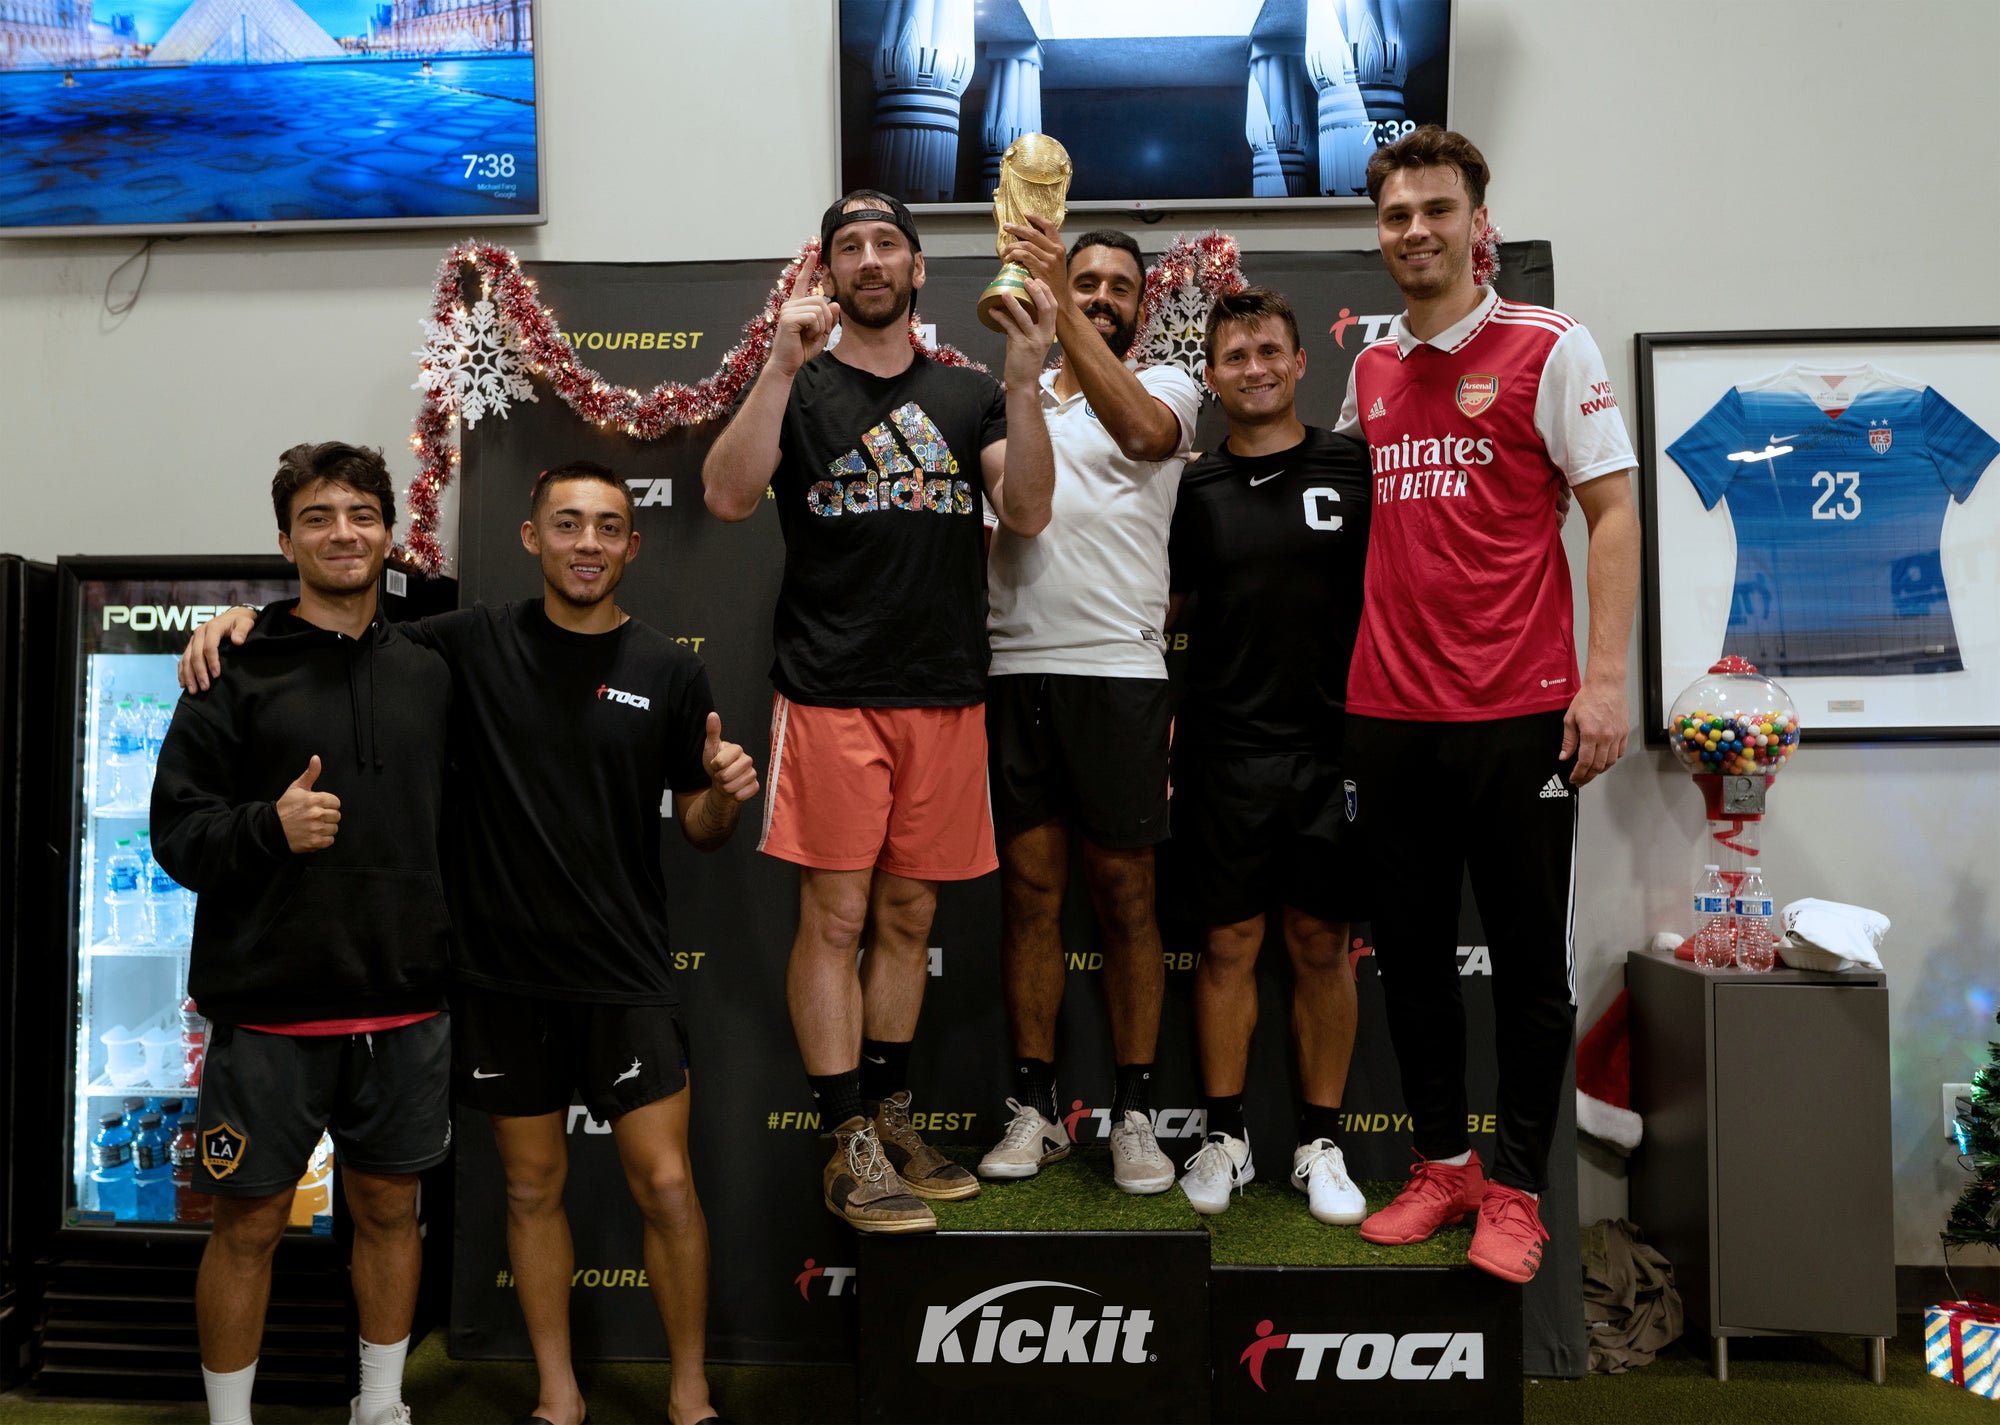 Kickit's Soccer Tennis Game Takes the World Cup by Storm, Selling Out Everywhere